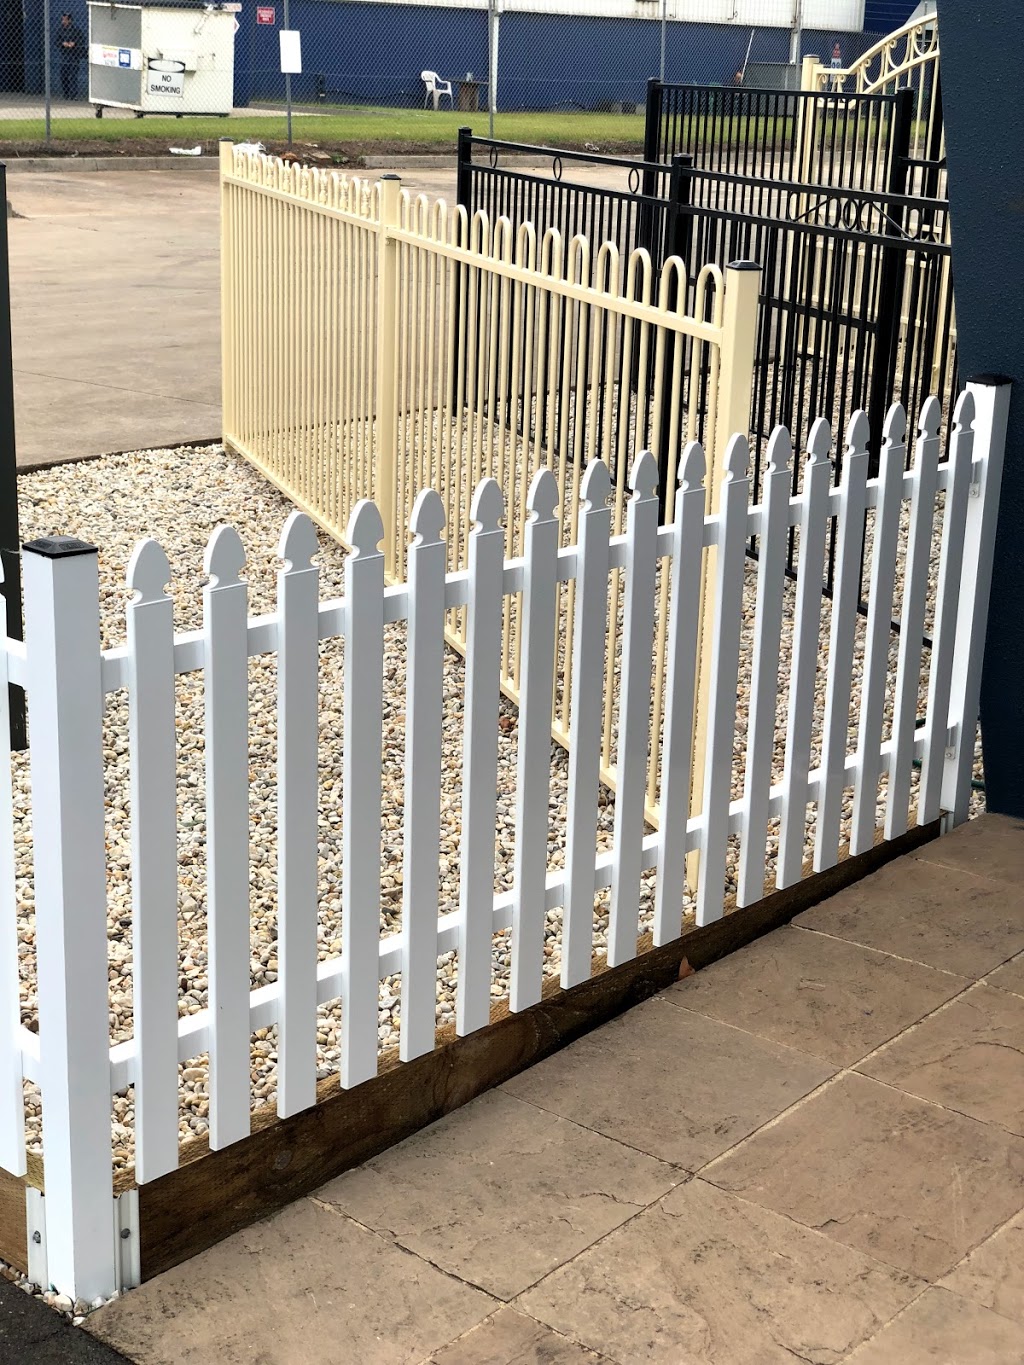 Our Town Fencing | store | 332 Boundary Rd, Derrimut VIC 3030, Australia | 0393694555 OR +61 3 9369 4555